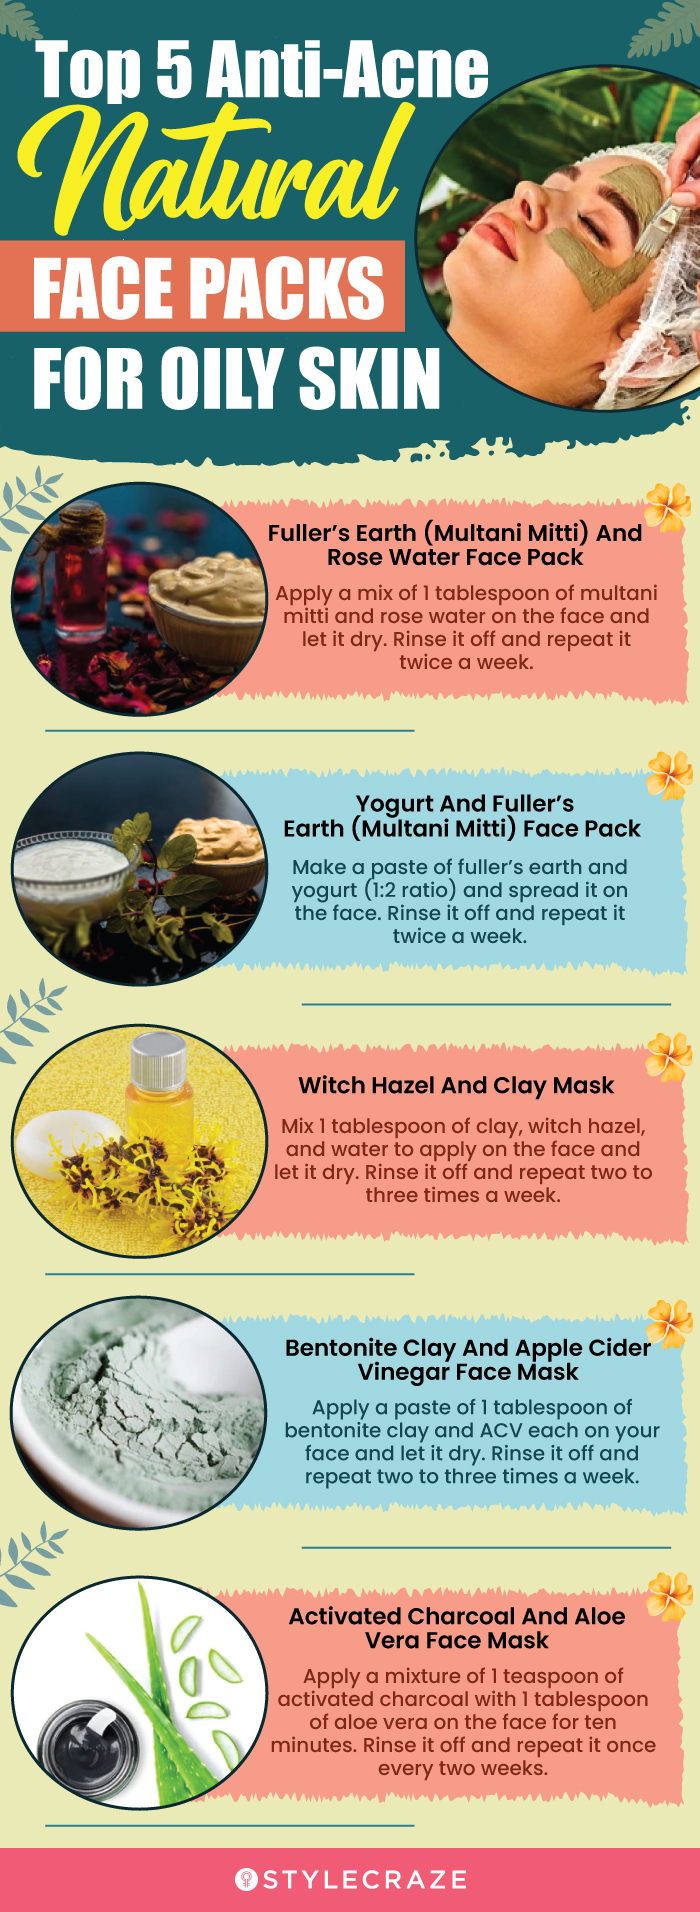 top 5 anti-acne natural face packs for oily skin (infographic)